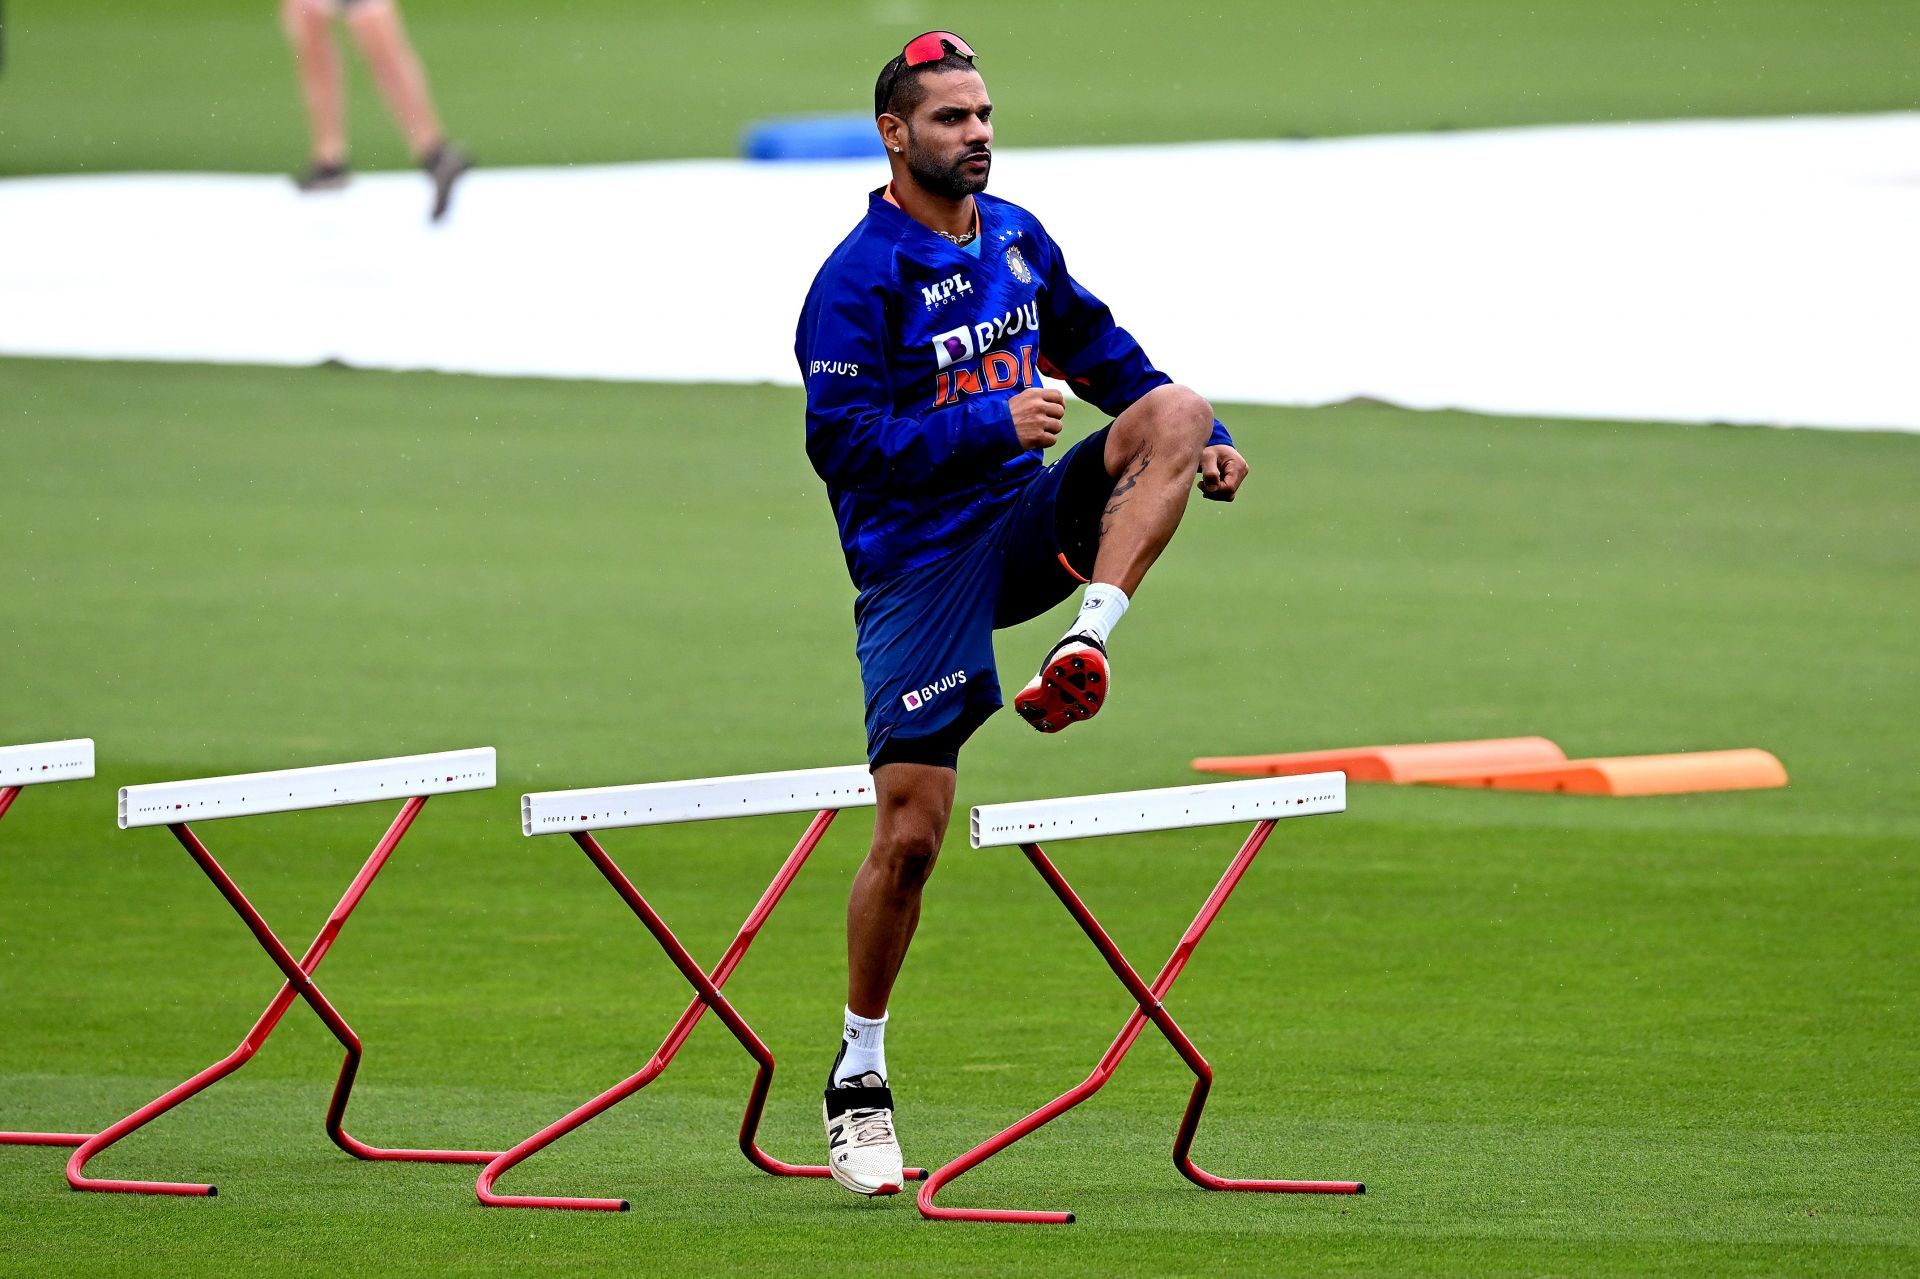 Shikhar Dhawan has been placed in Grade C by the BCCI